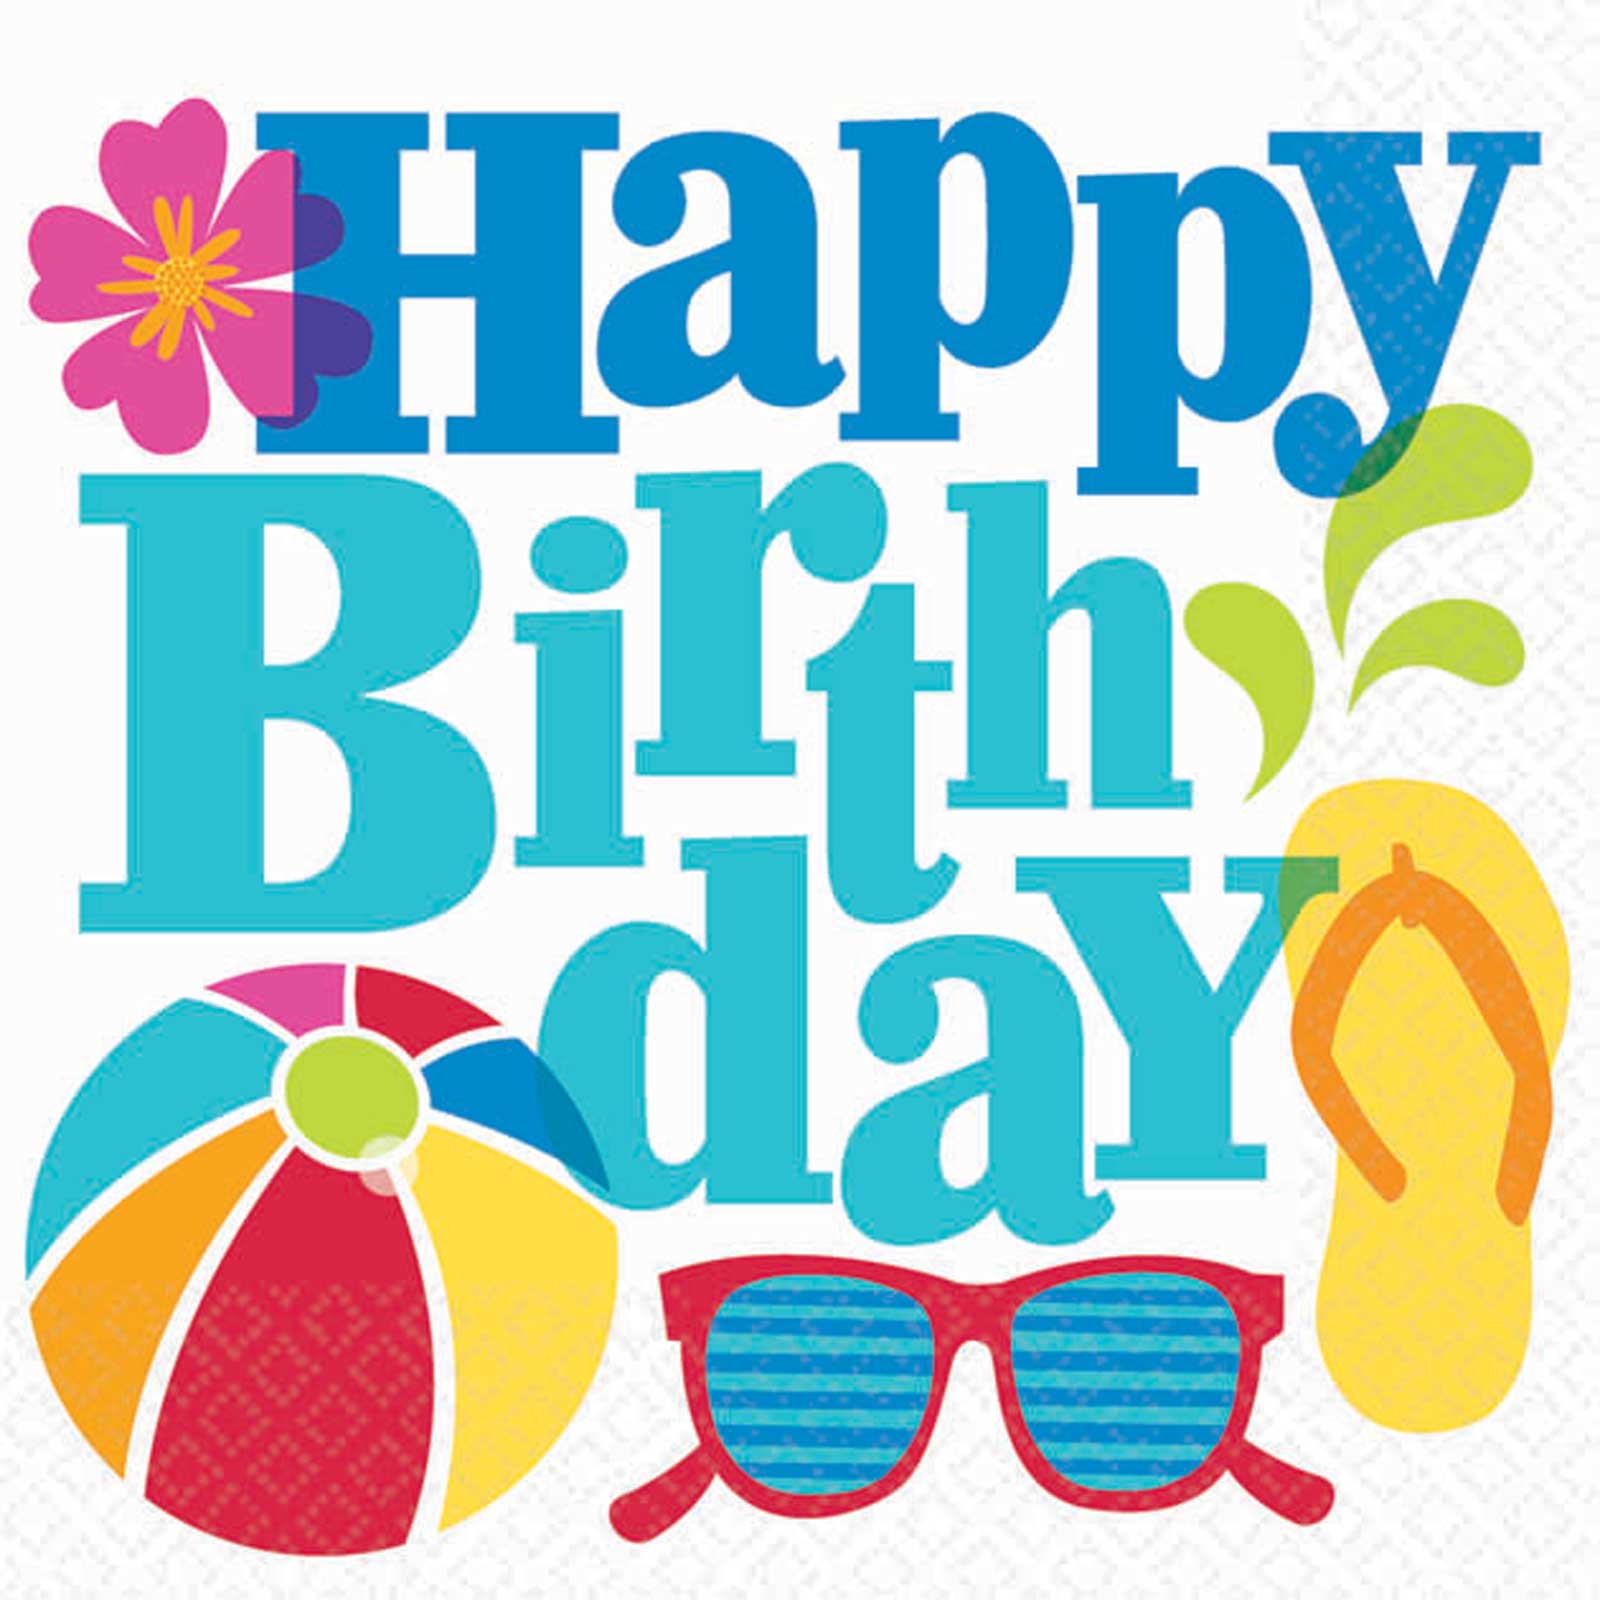 Luau Birthday Clip Art Borders Free   Free Cliparts That You Can